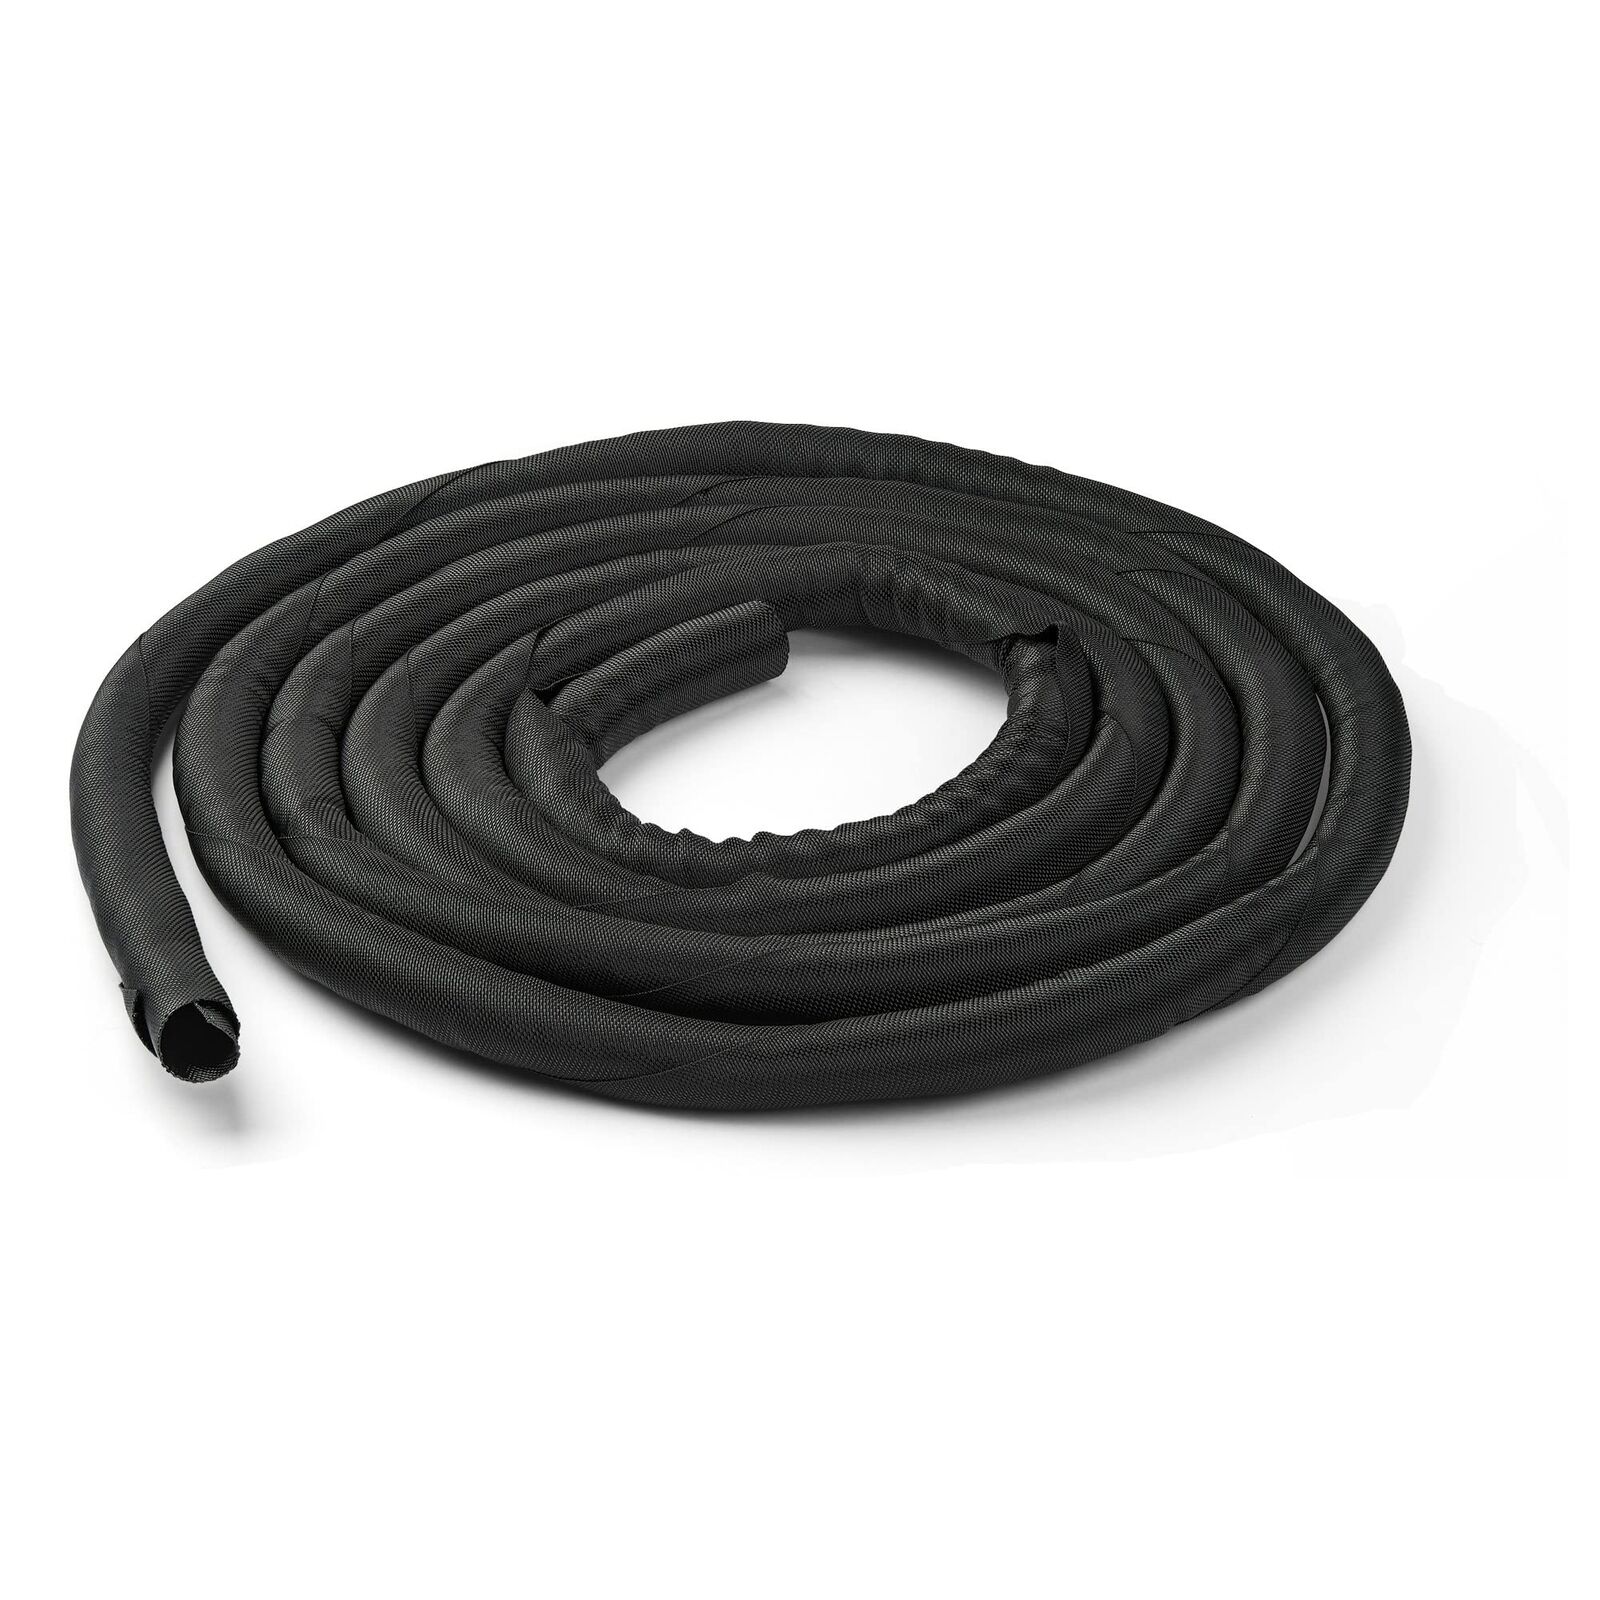 StarTech.com 15\' (4.6m) Cable Management Sleeve - Flexible Coiled Cable Wrap ...